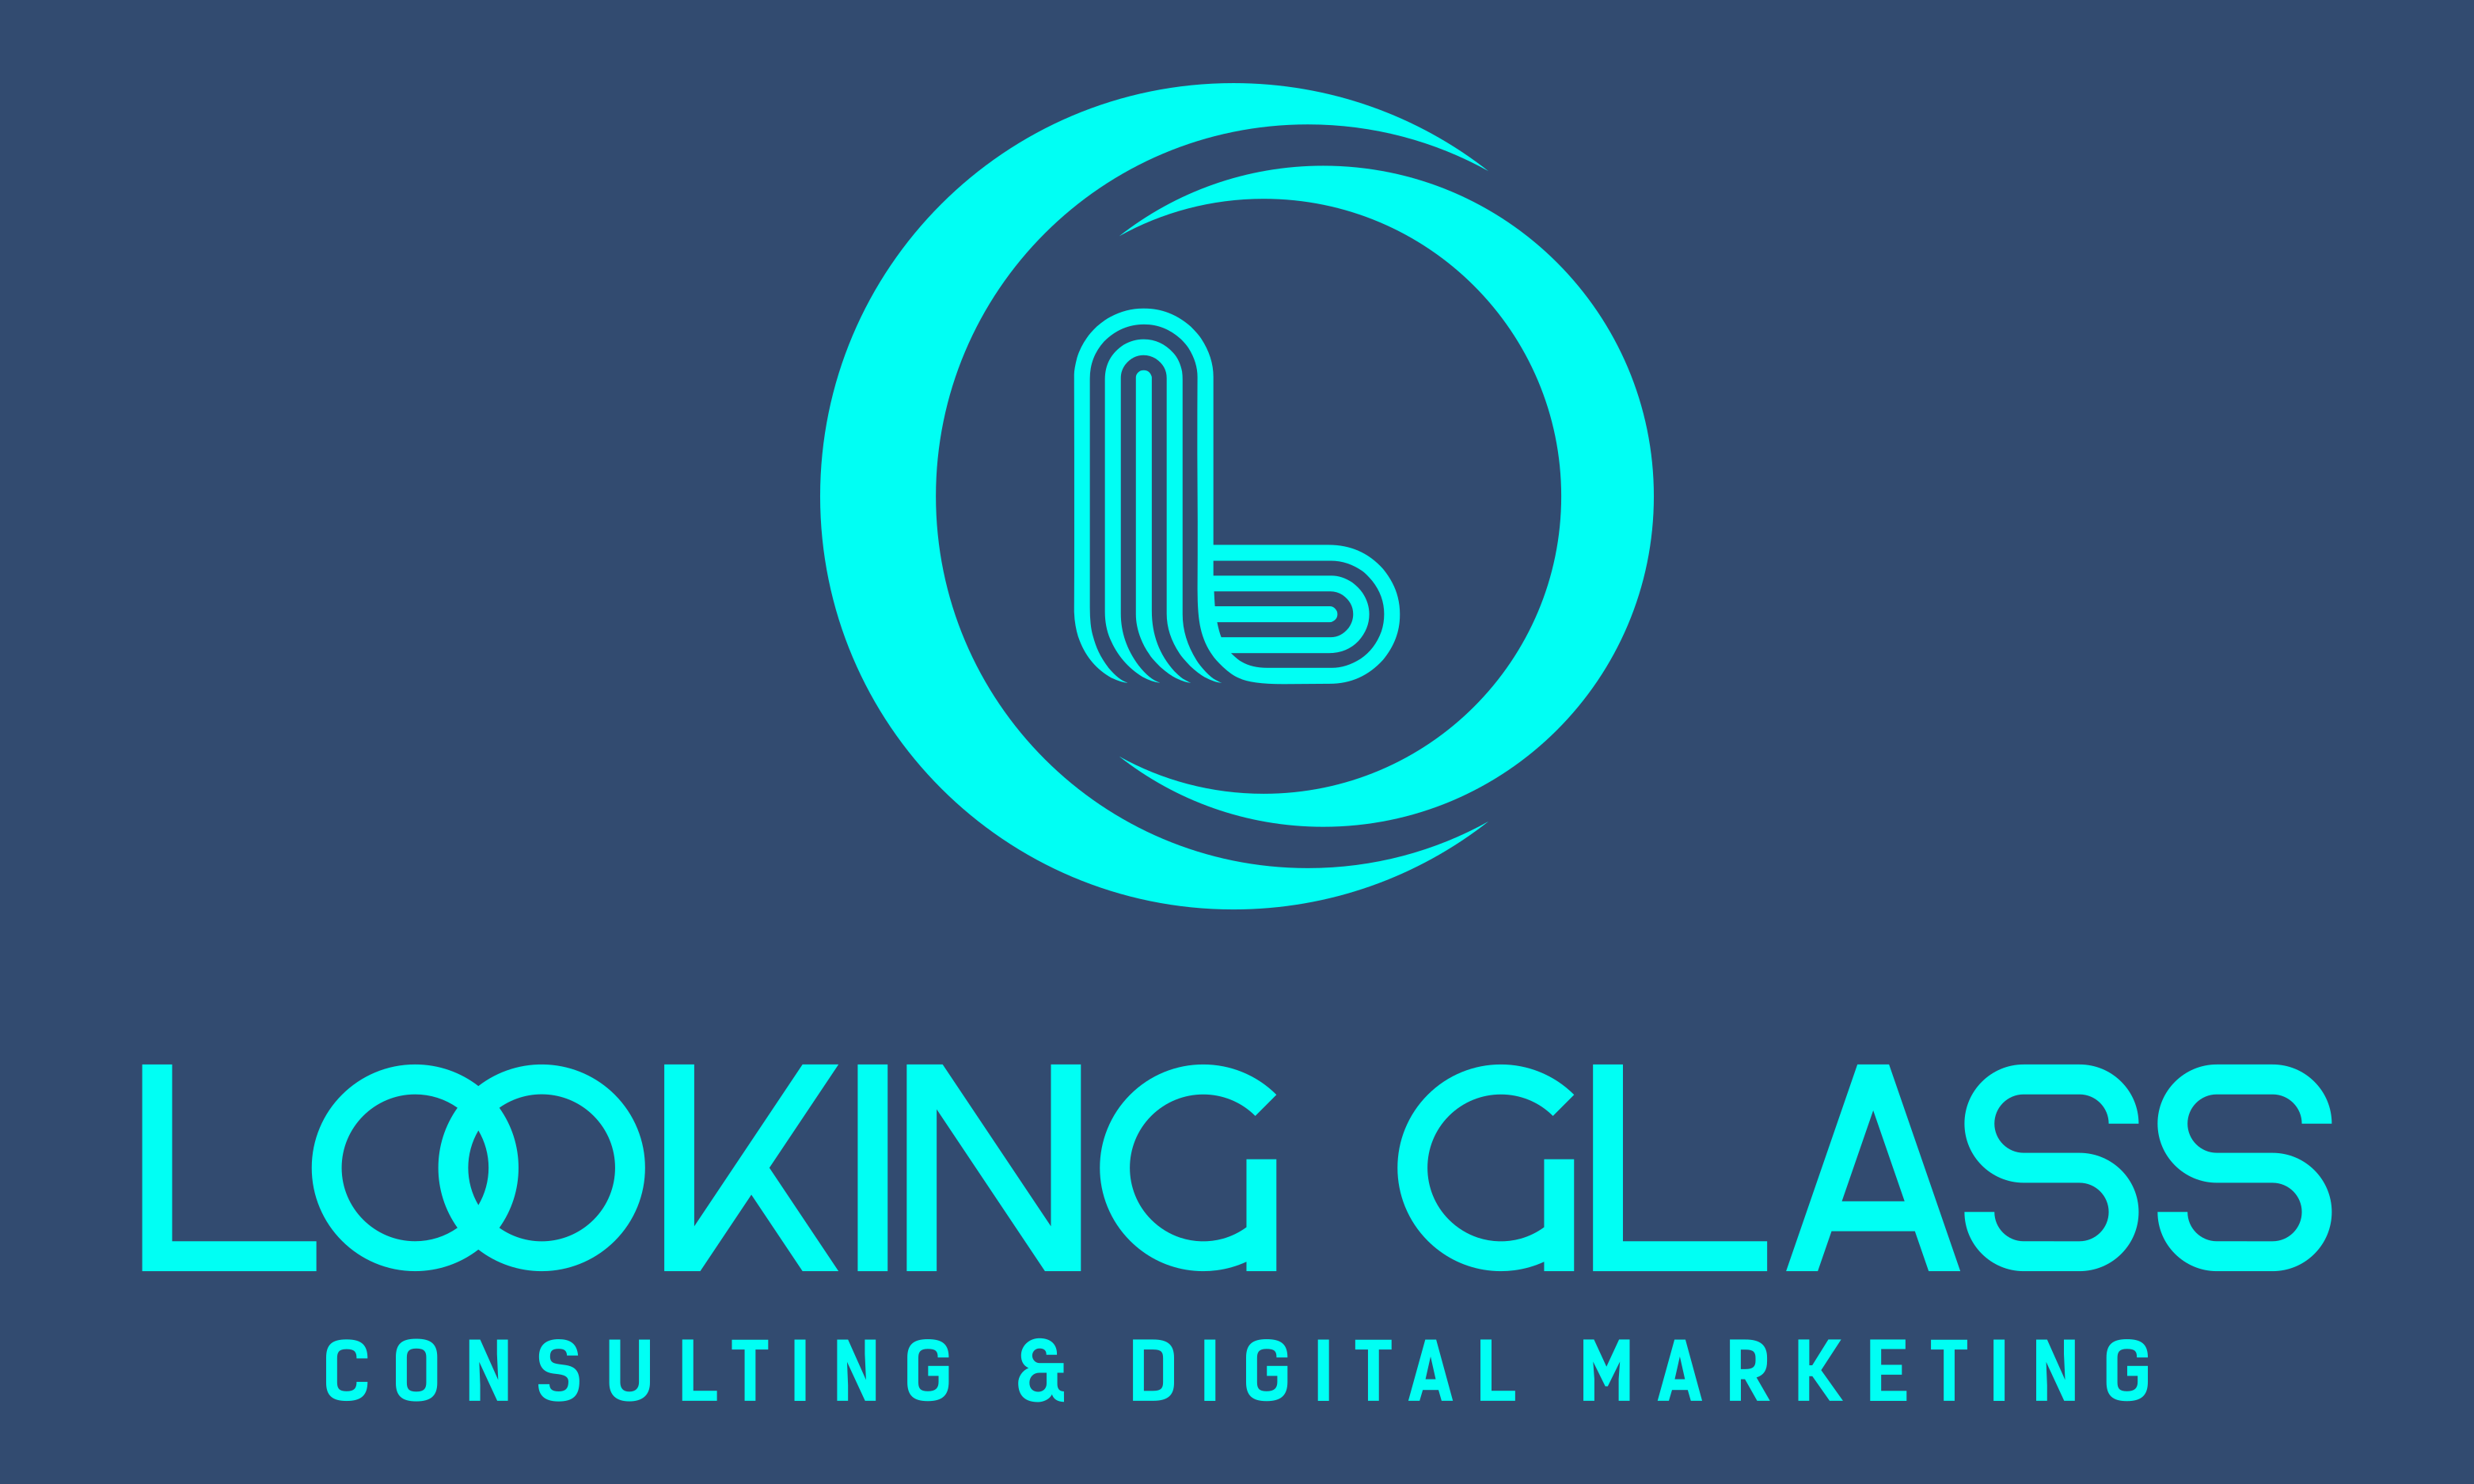 Looking Glass Consulting and Digital Marketing LLC logo in teal on a light navy background